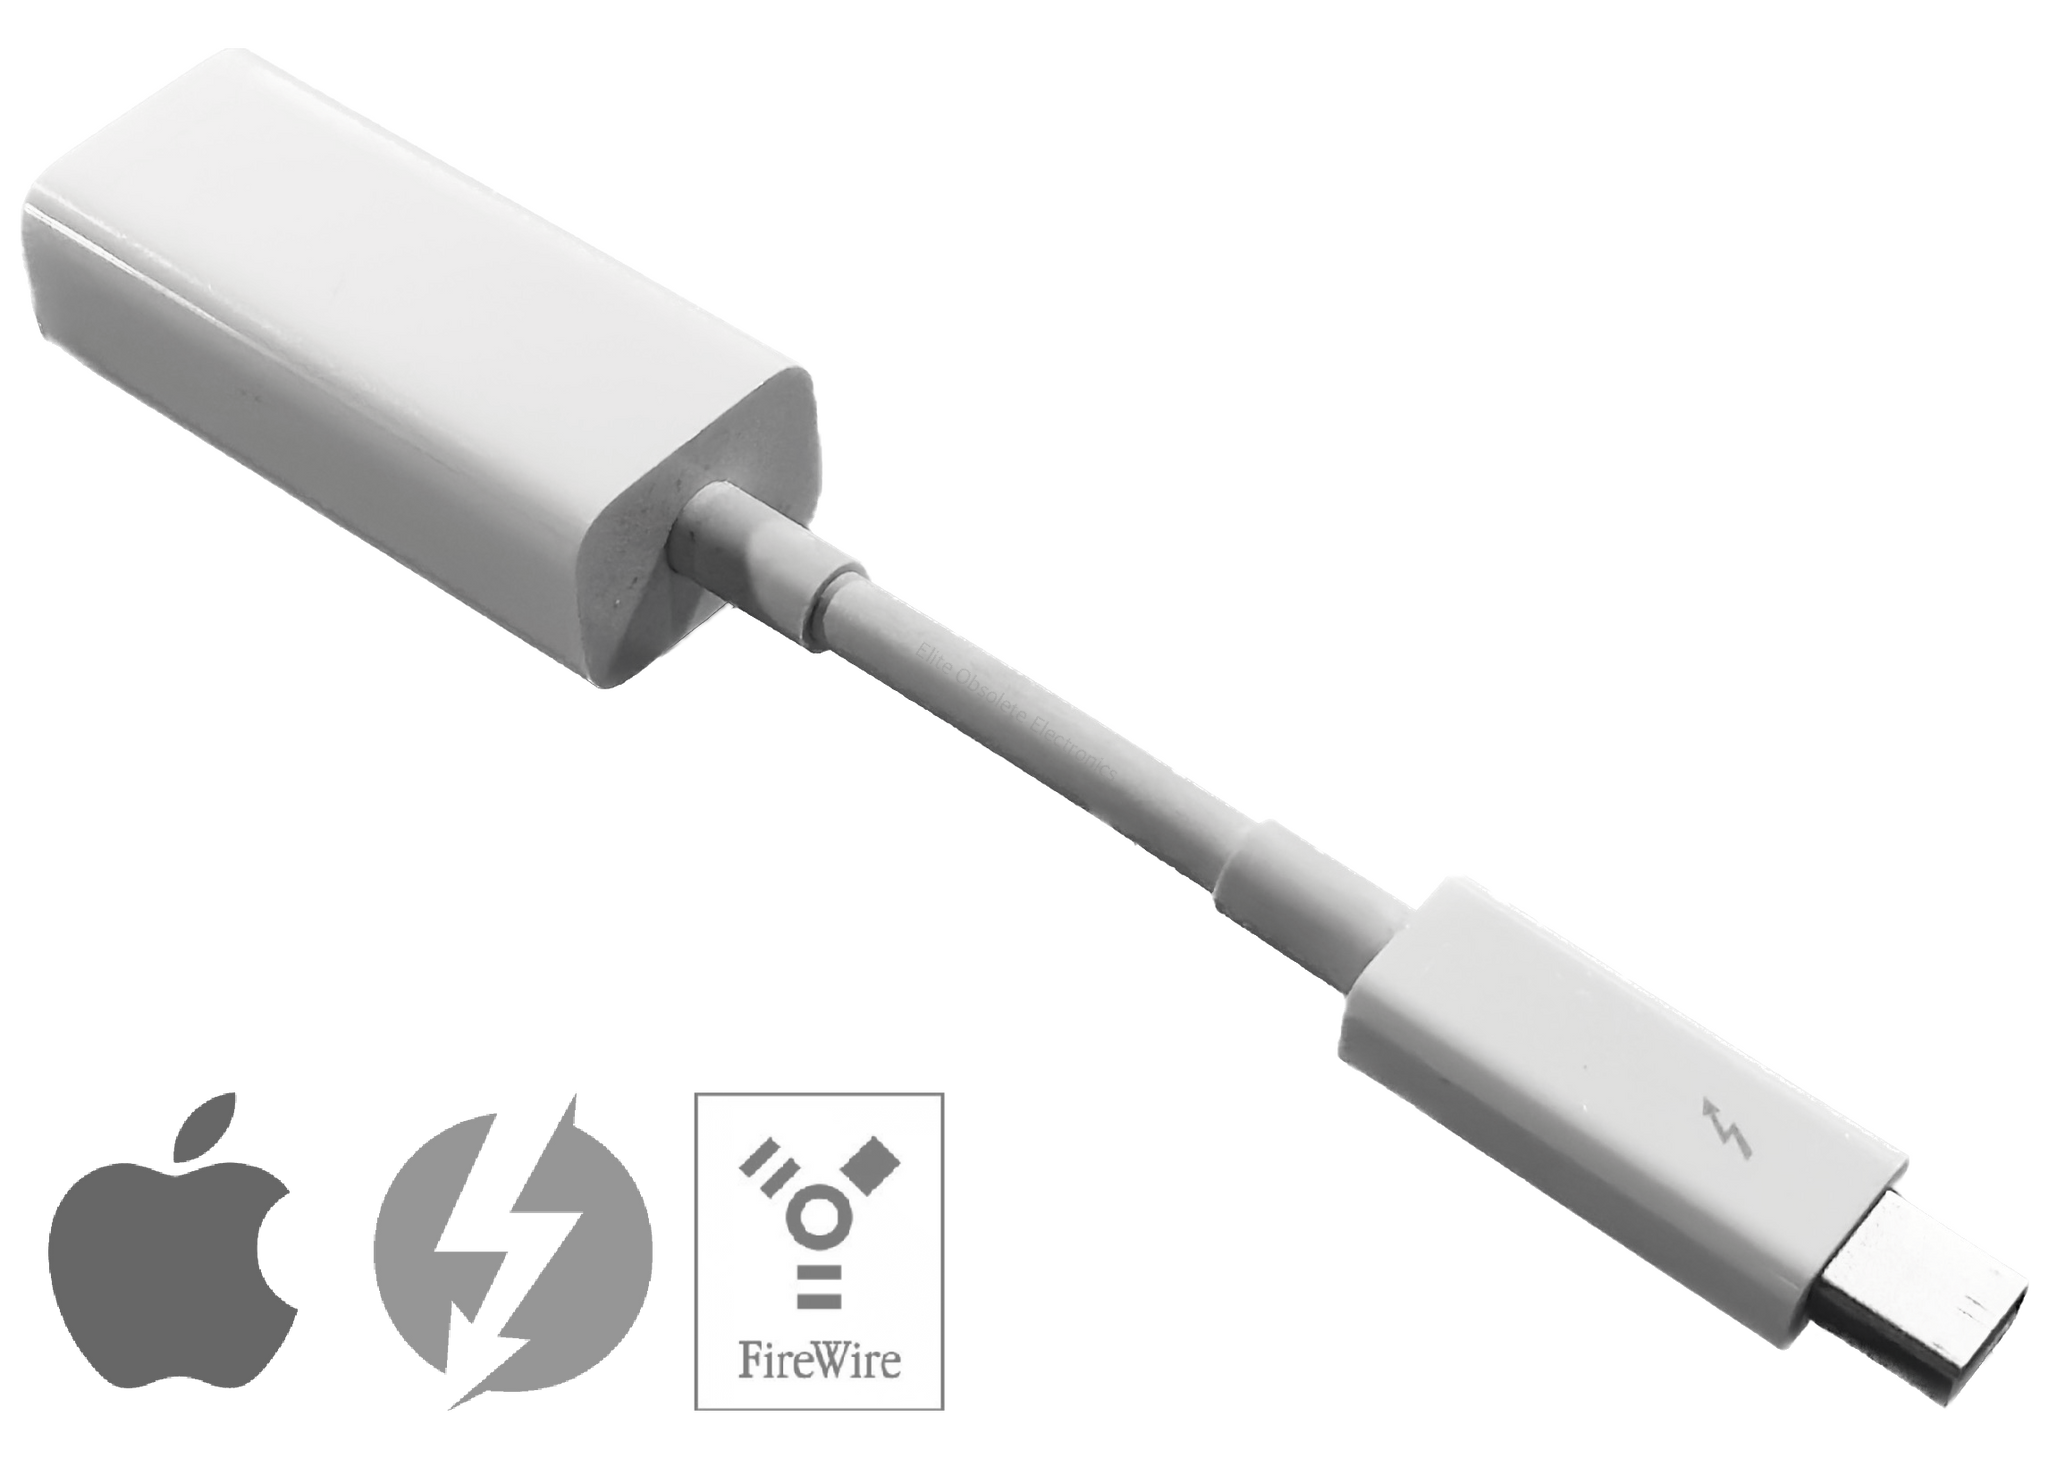 Original Apple Thunderbolt 2 Male to FireWire 800 Female Adapter Dongle A1463 MD464LL/A Used